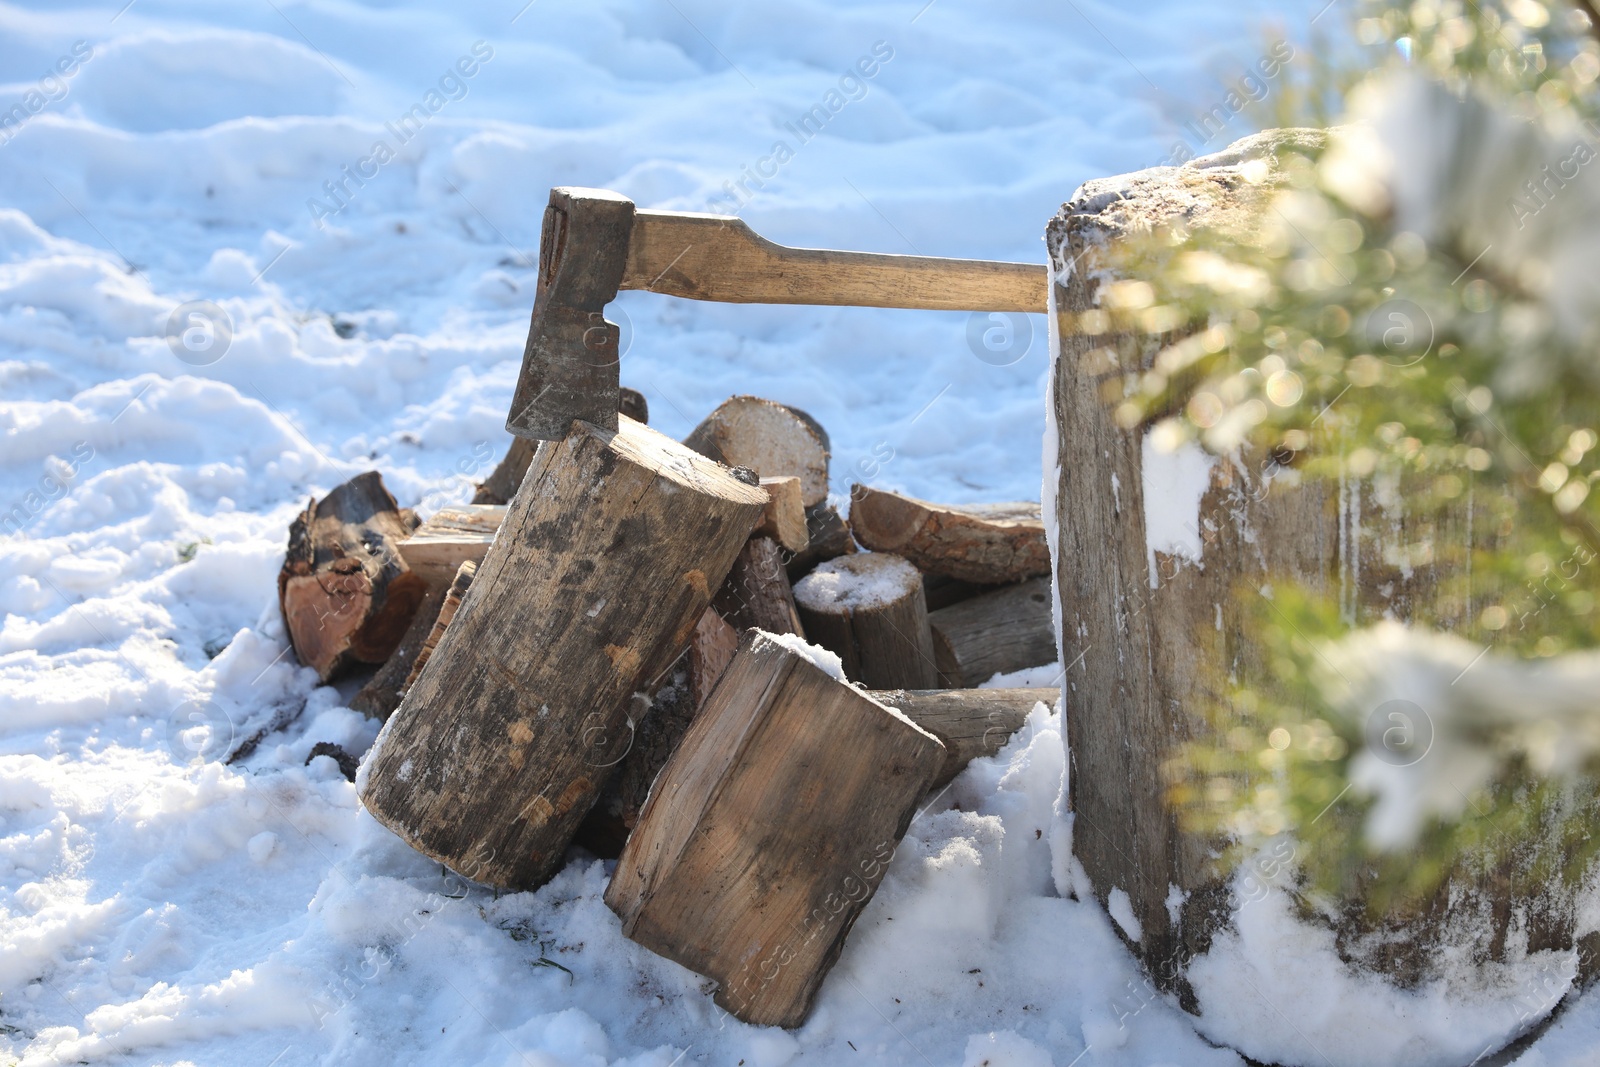 Photo of Metal axe in wooden log and pile of wood outdoors on sunny winter day